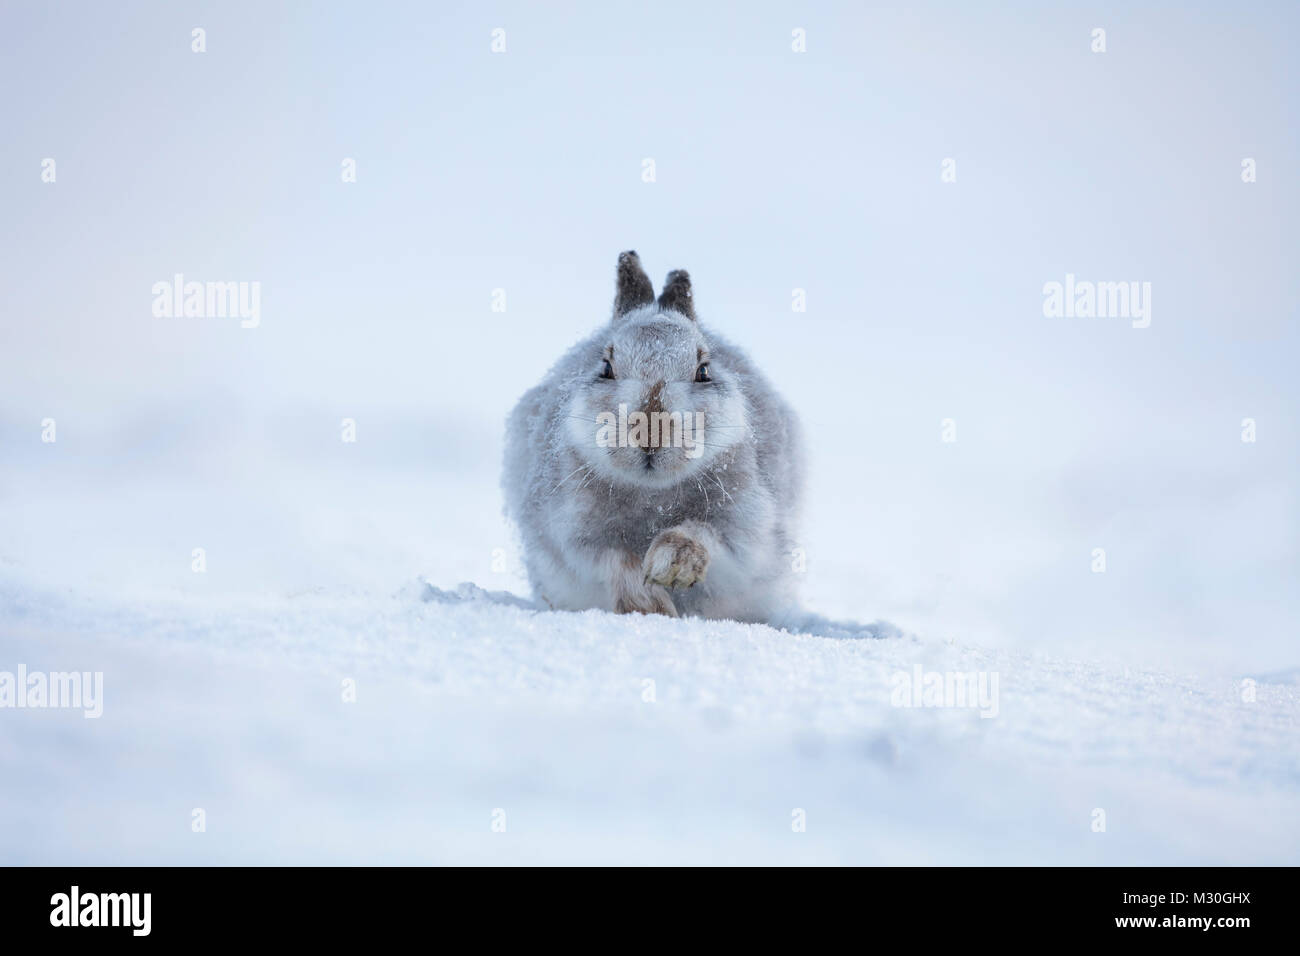 Cute white hare in snow with raised paw Stock Photo